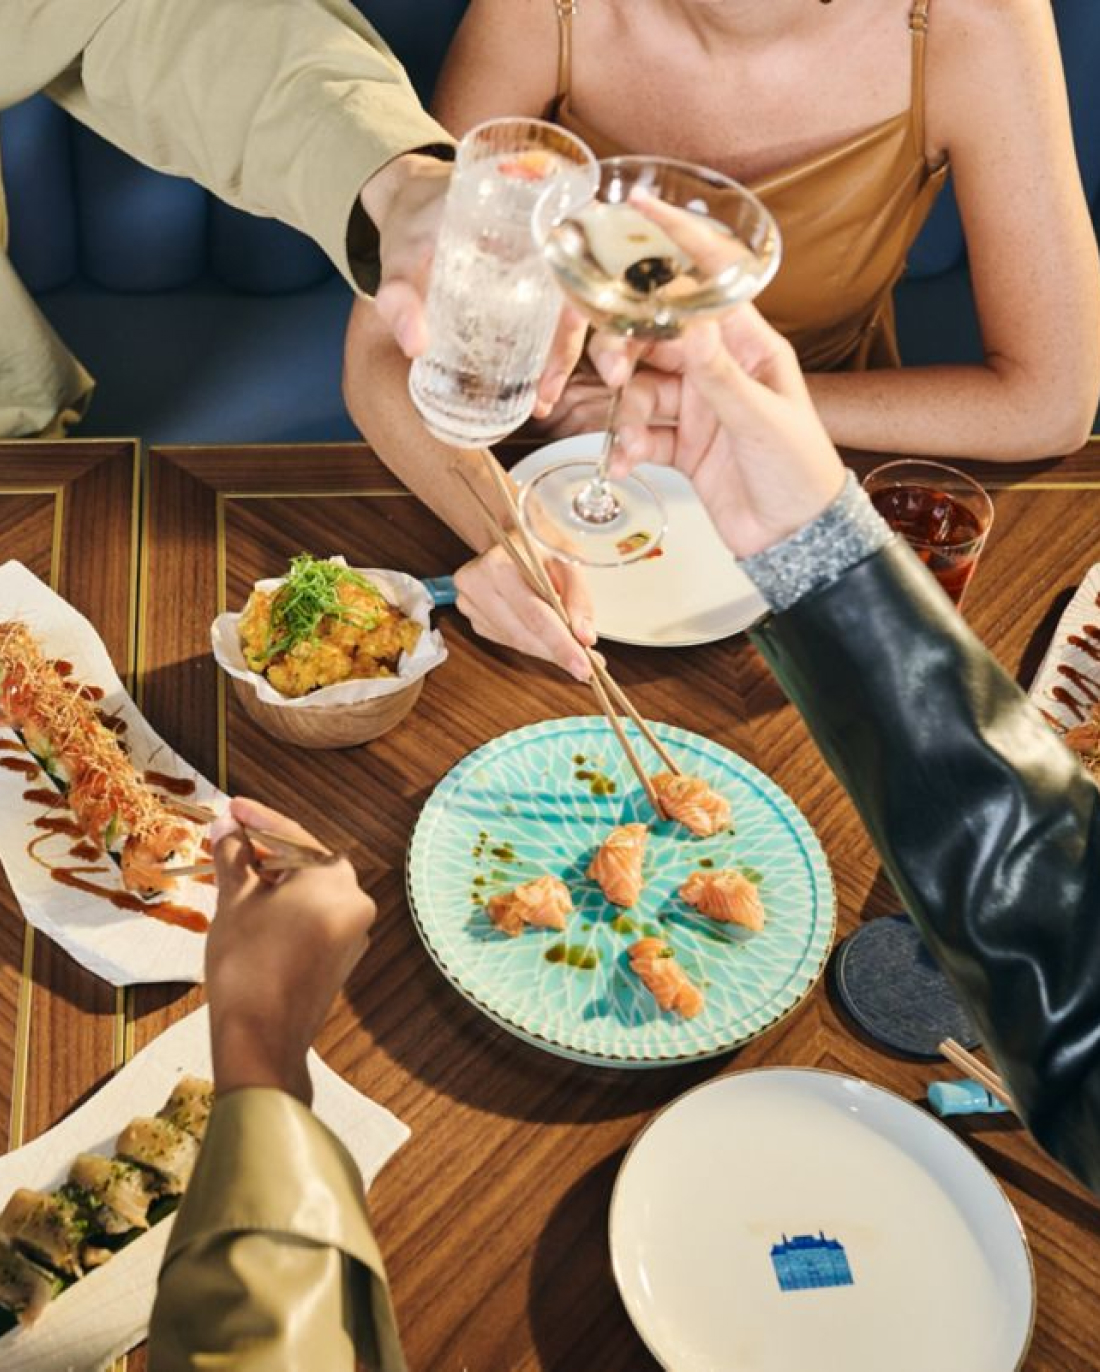 Three people cheers with drinks over a table featuring an array of sushi and appetizers in a cozy dining setup.